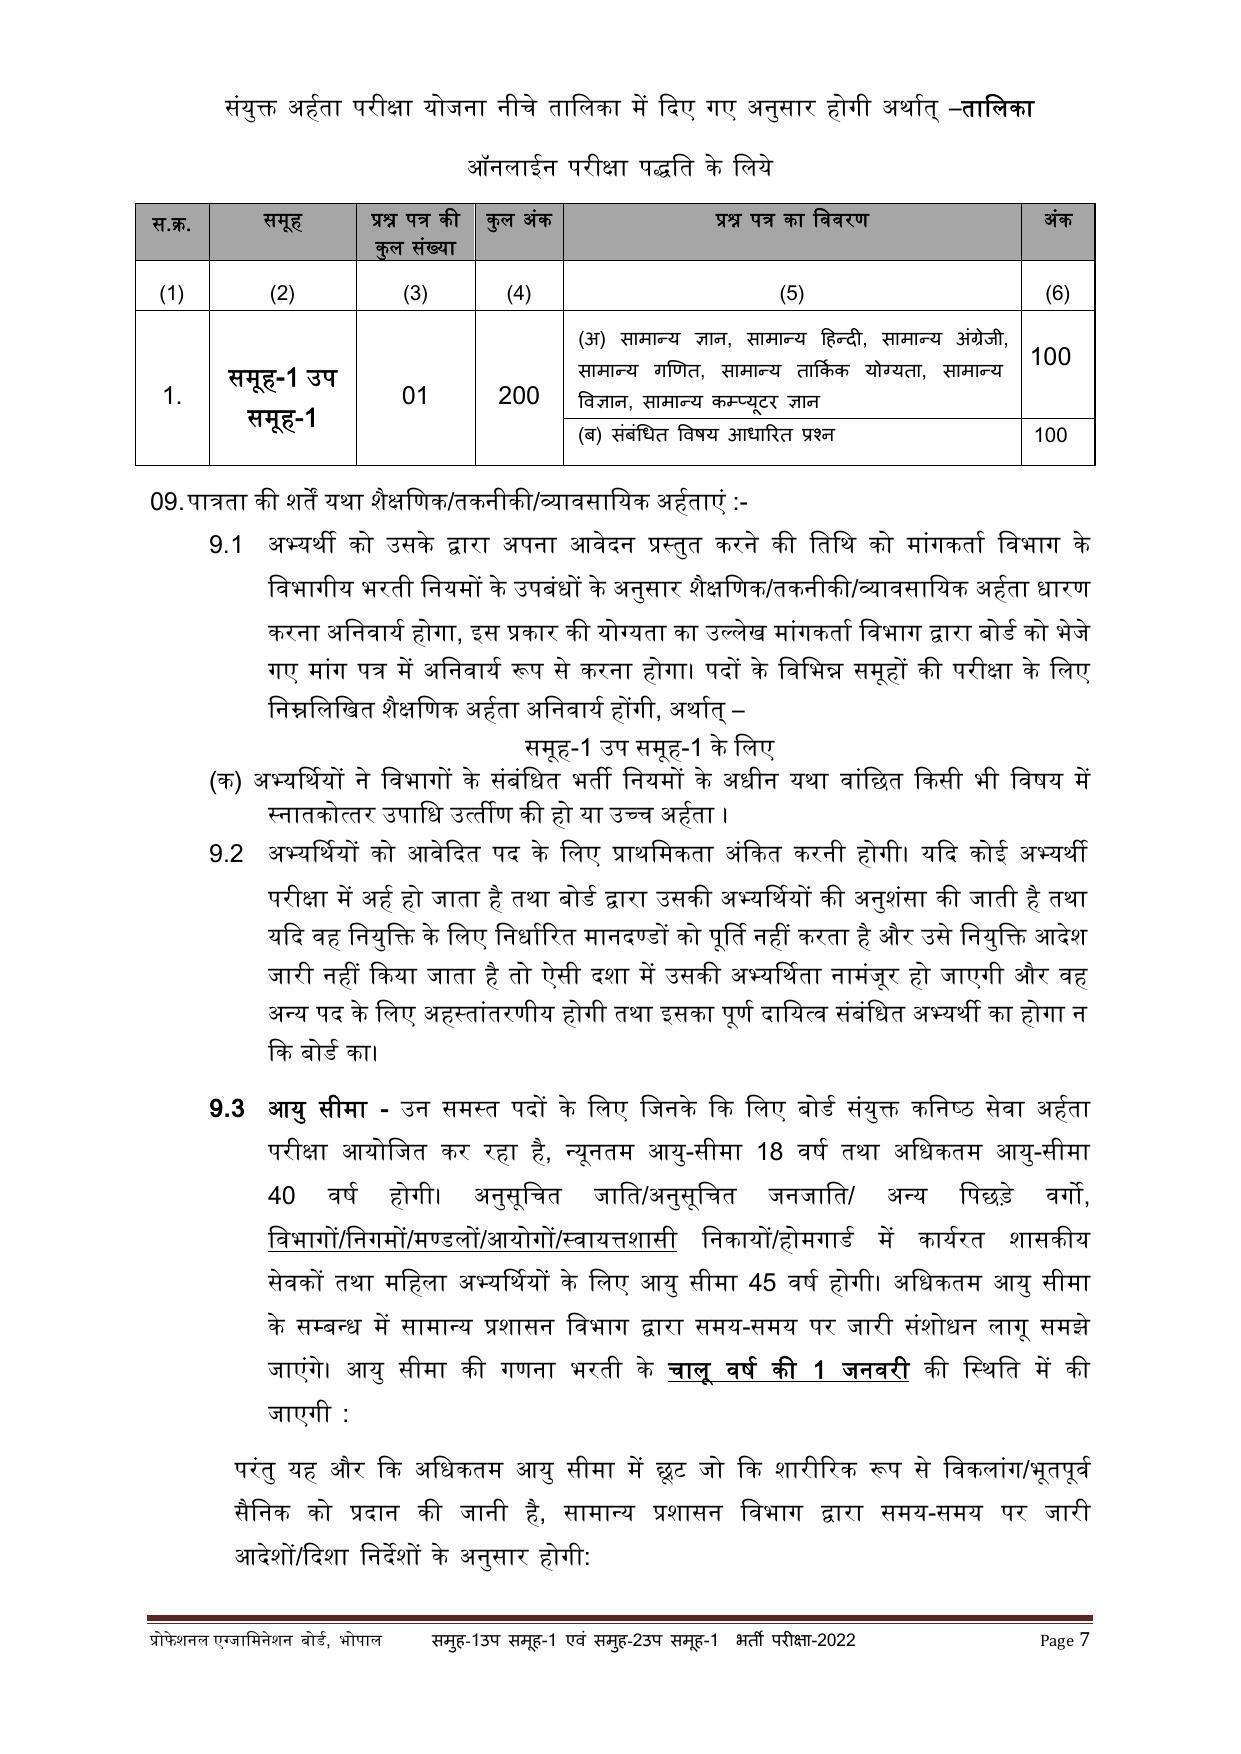 MPPEB Group-I Sub Group-I & Group-II Sub Group-I Recruitment 2022 - Page 41